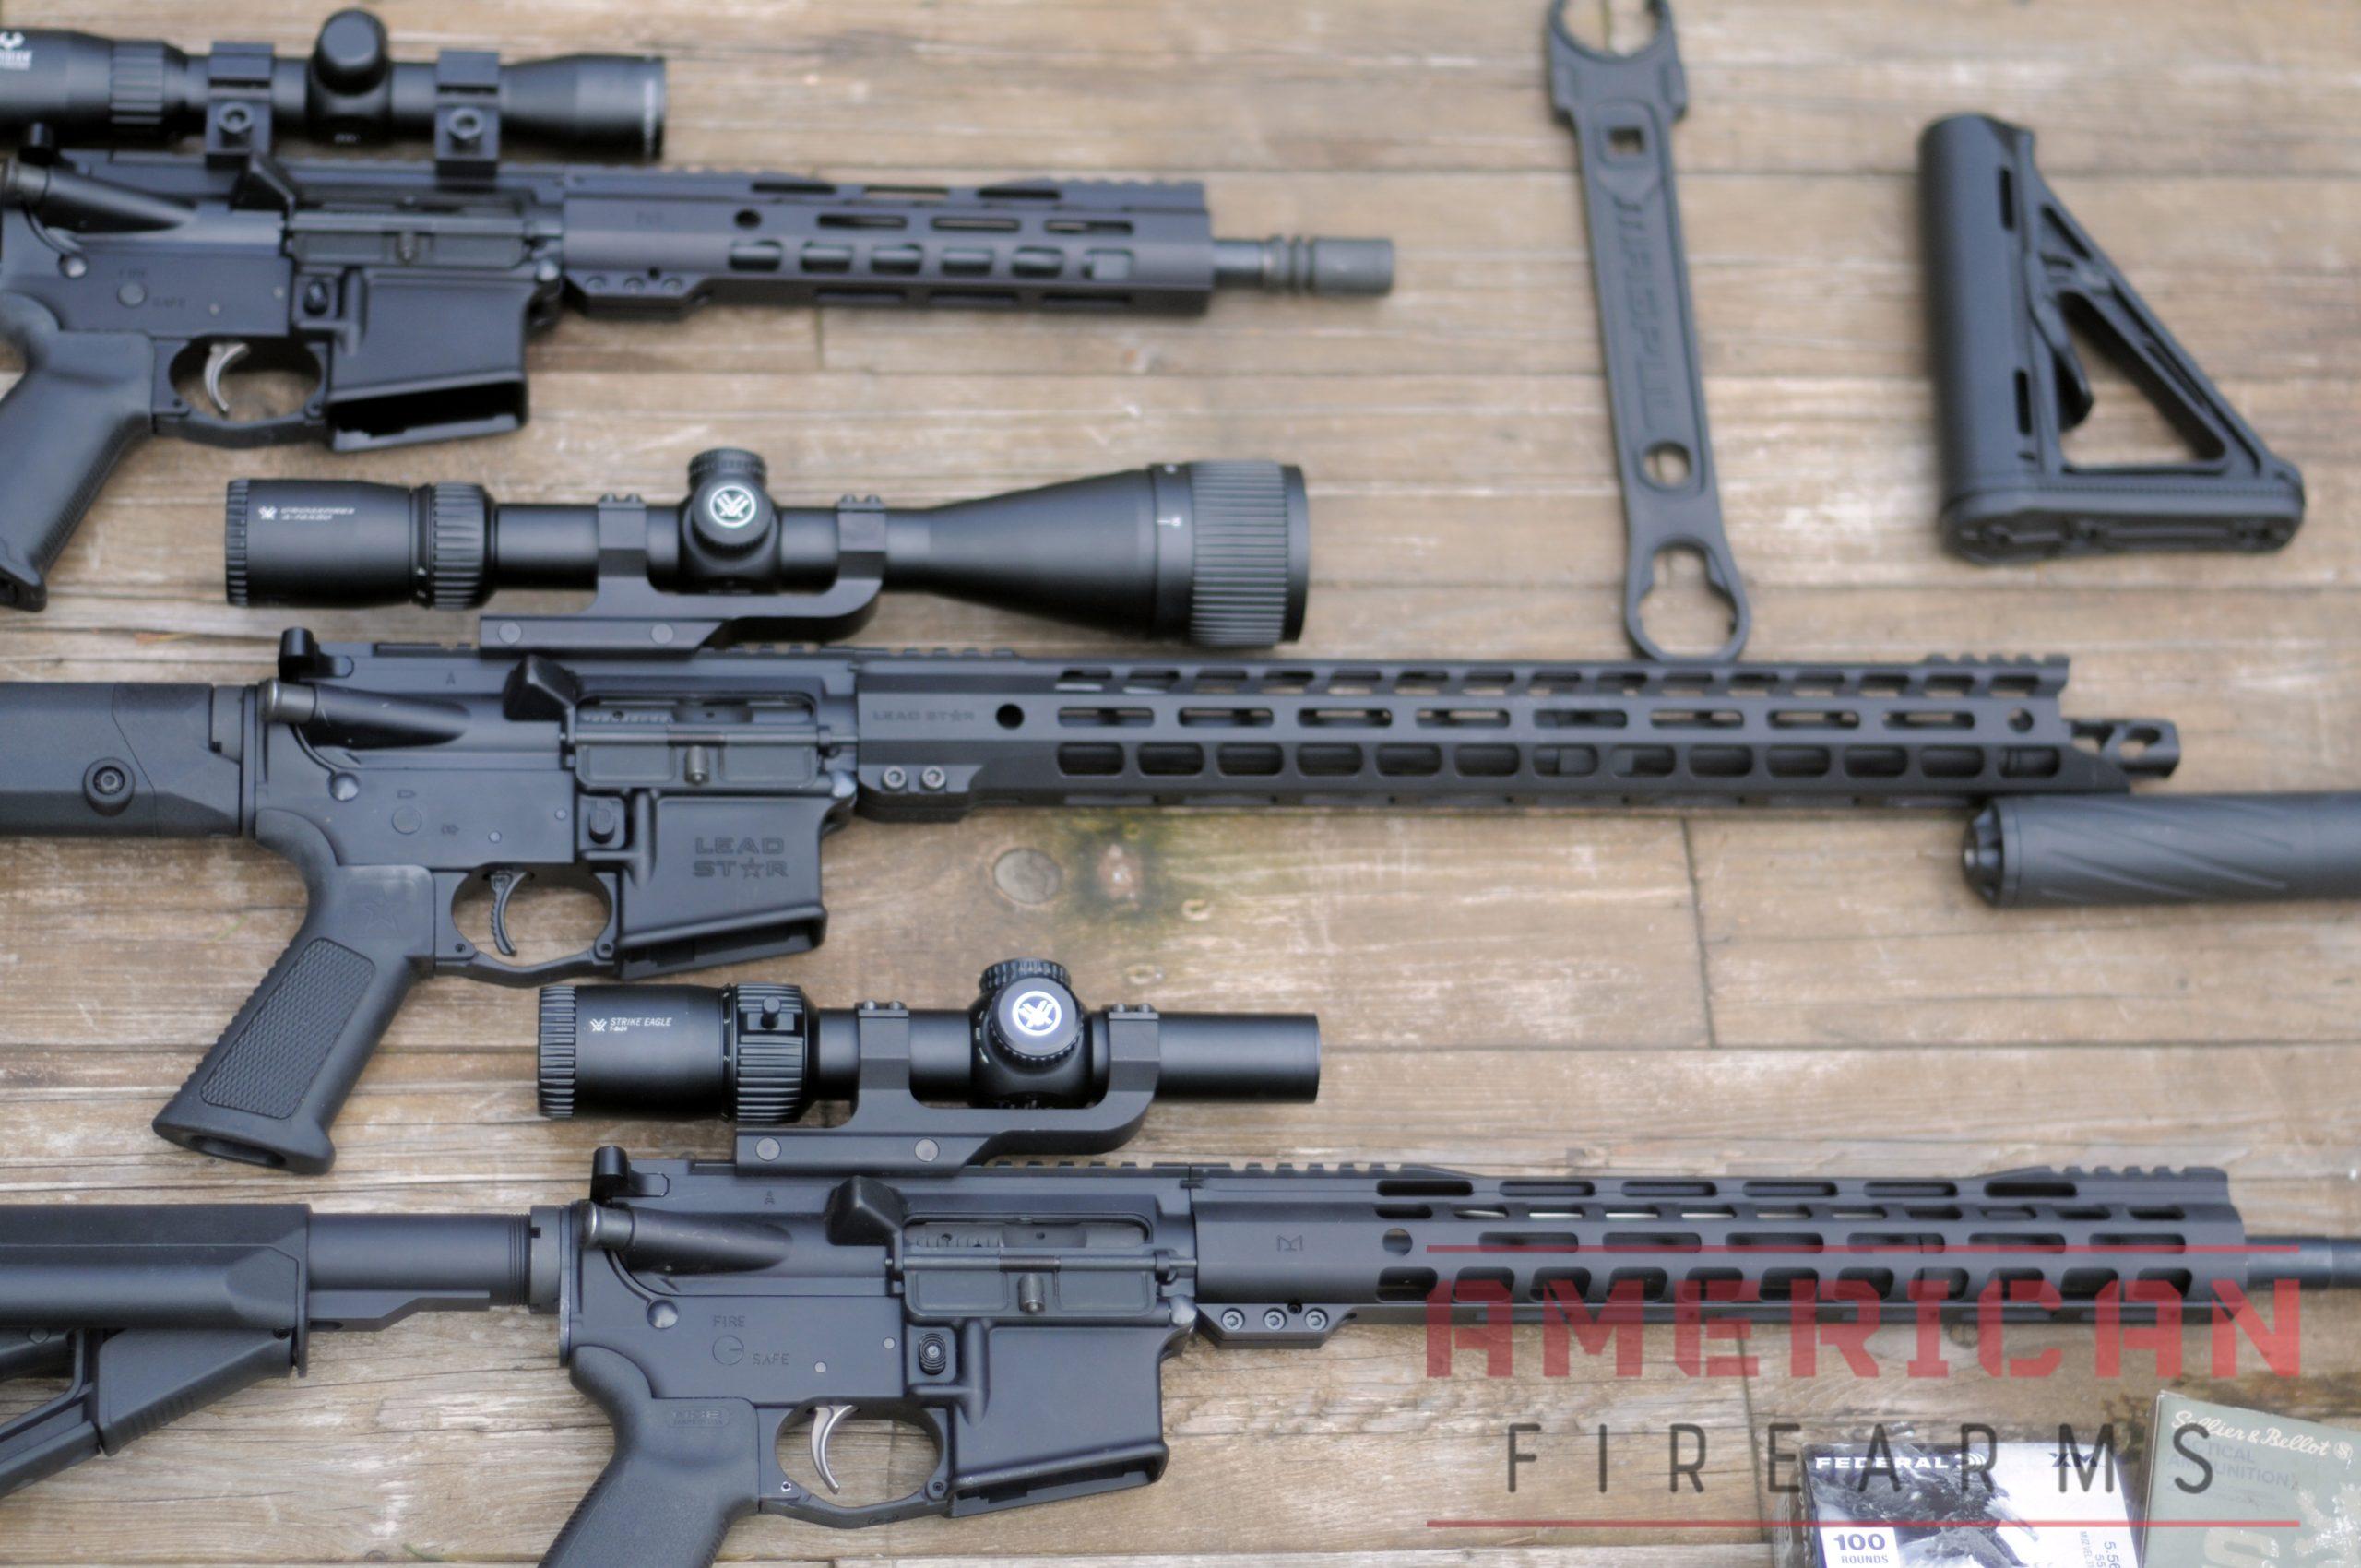 Some of my PSA guns -- a 10.5" AR pistol (top), Lead Star Grunt (center), and the PA-15 (bottom) I'm covering in this review.